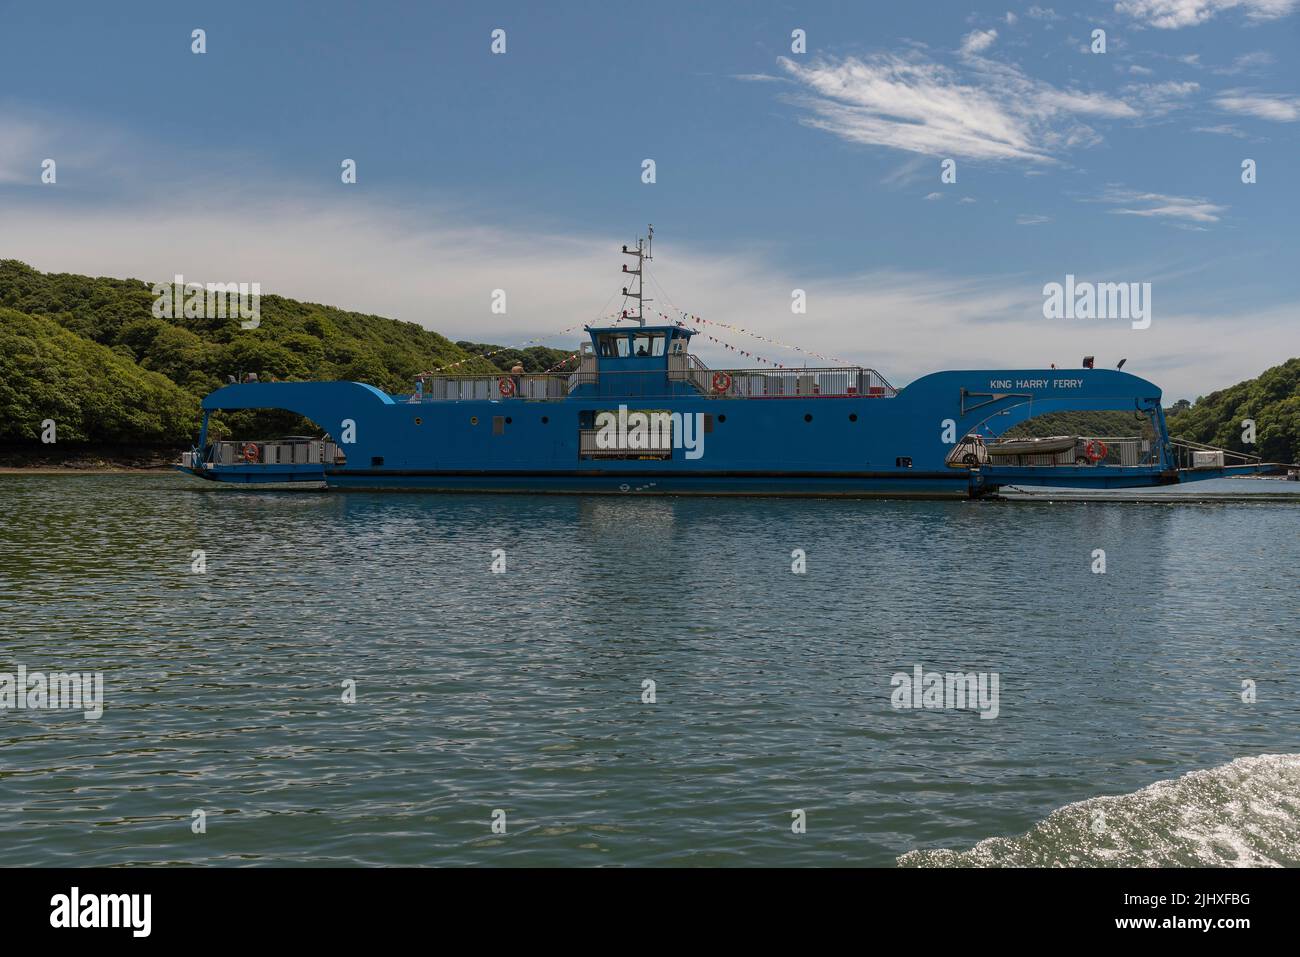 Feock, Truro, Cornwall, England, UK. 2022. Blue  painted vehicle ferry on the River Fal in Cornwall, UK. The King Harry. Stock Photo